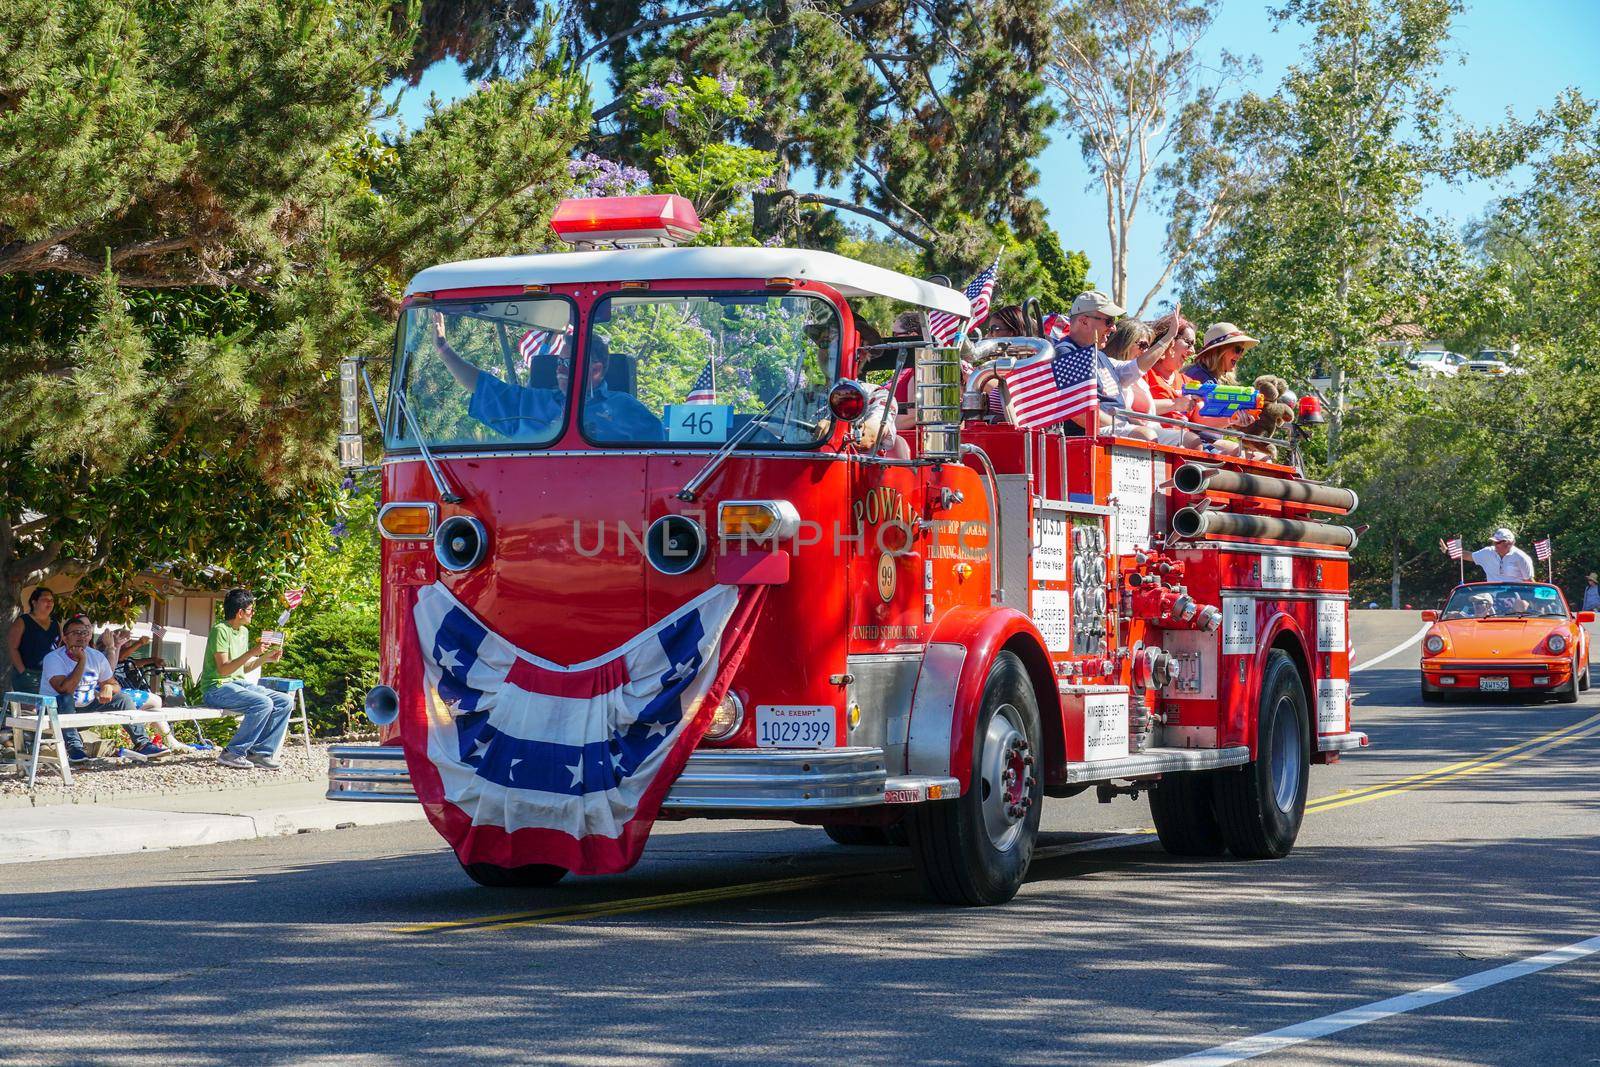 Old Firetruck and people at the July 4th Independence Day Parade in Rancho Bernardo, San Diego by Bonandbon